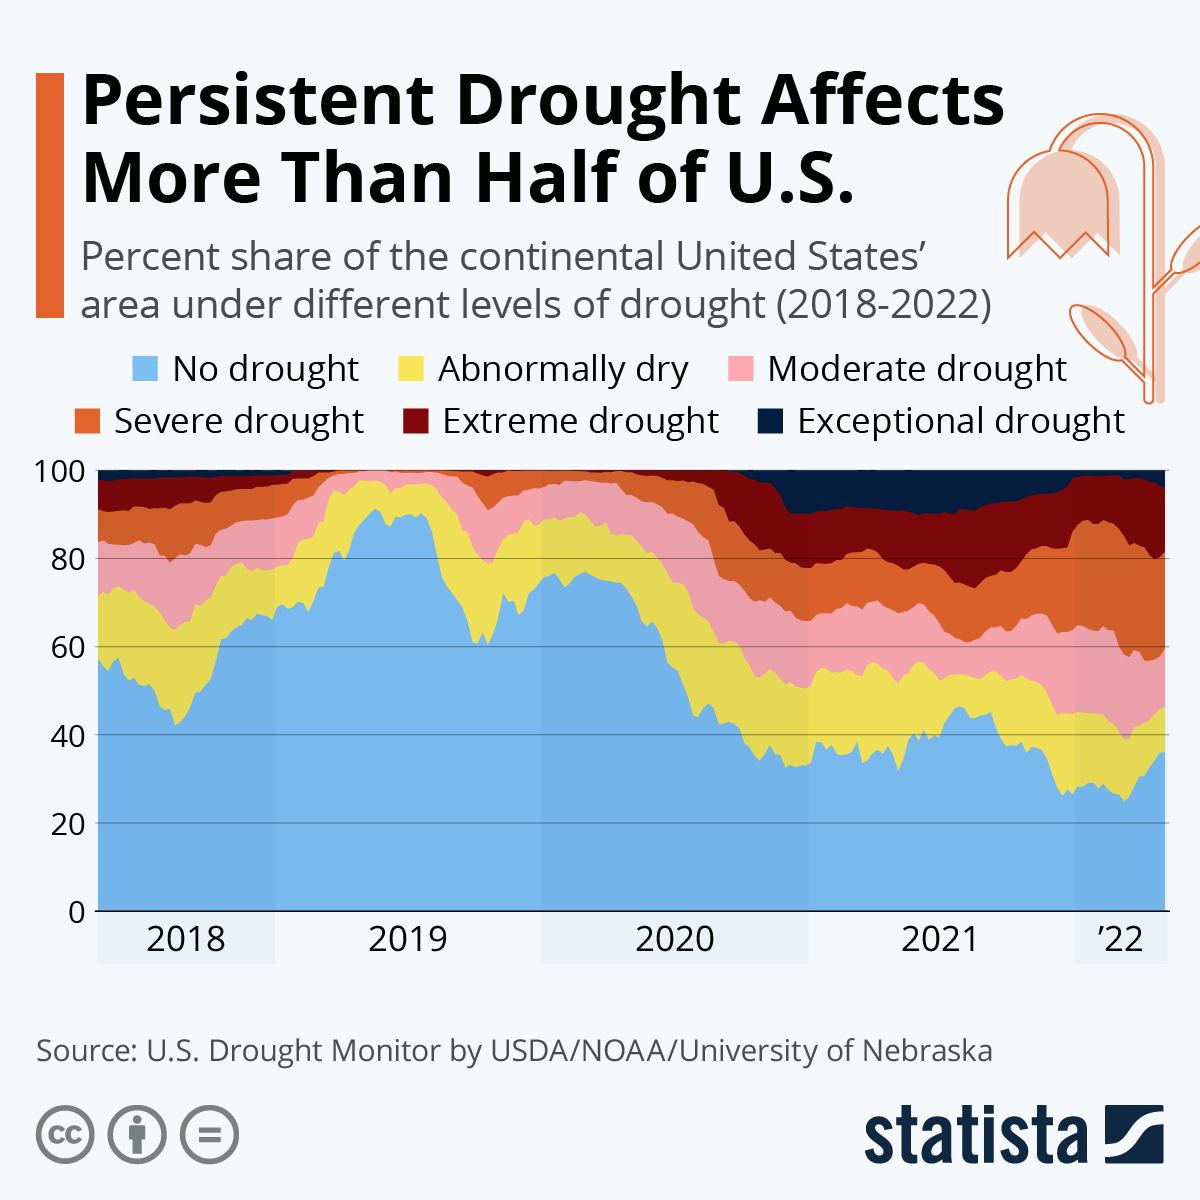 Persistent Drought Affects More Than Half of U.S.